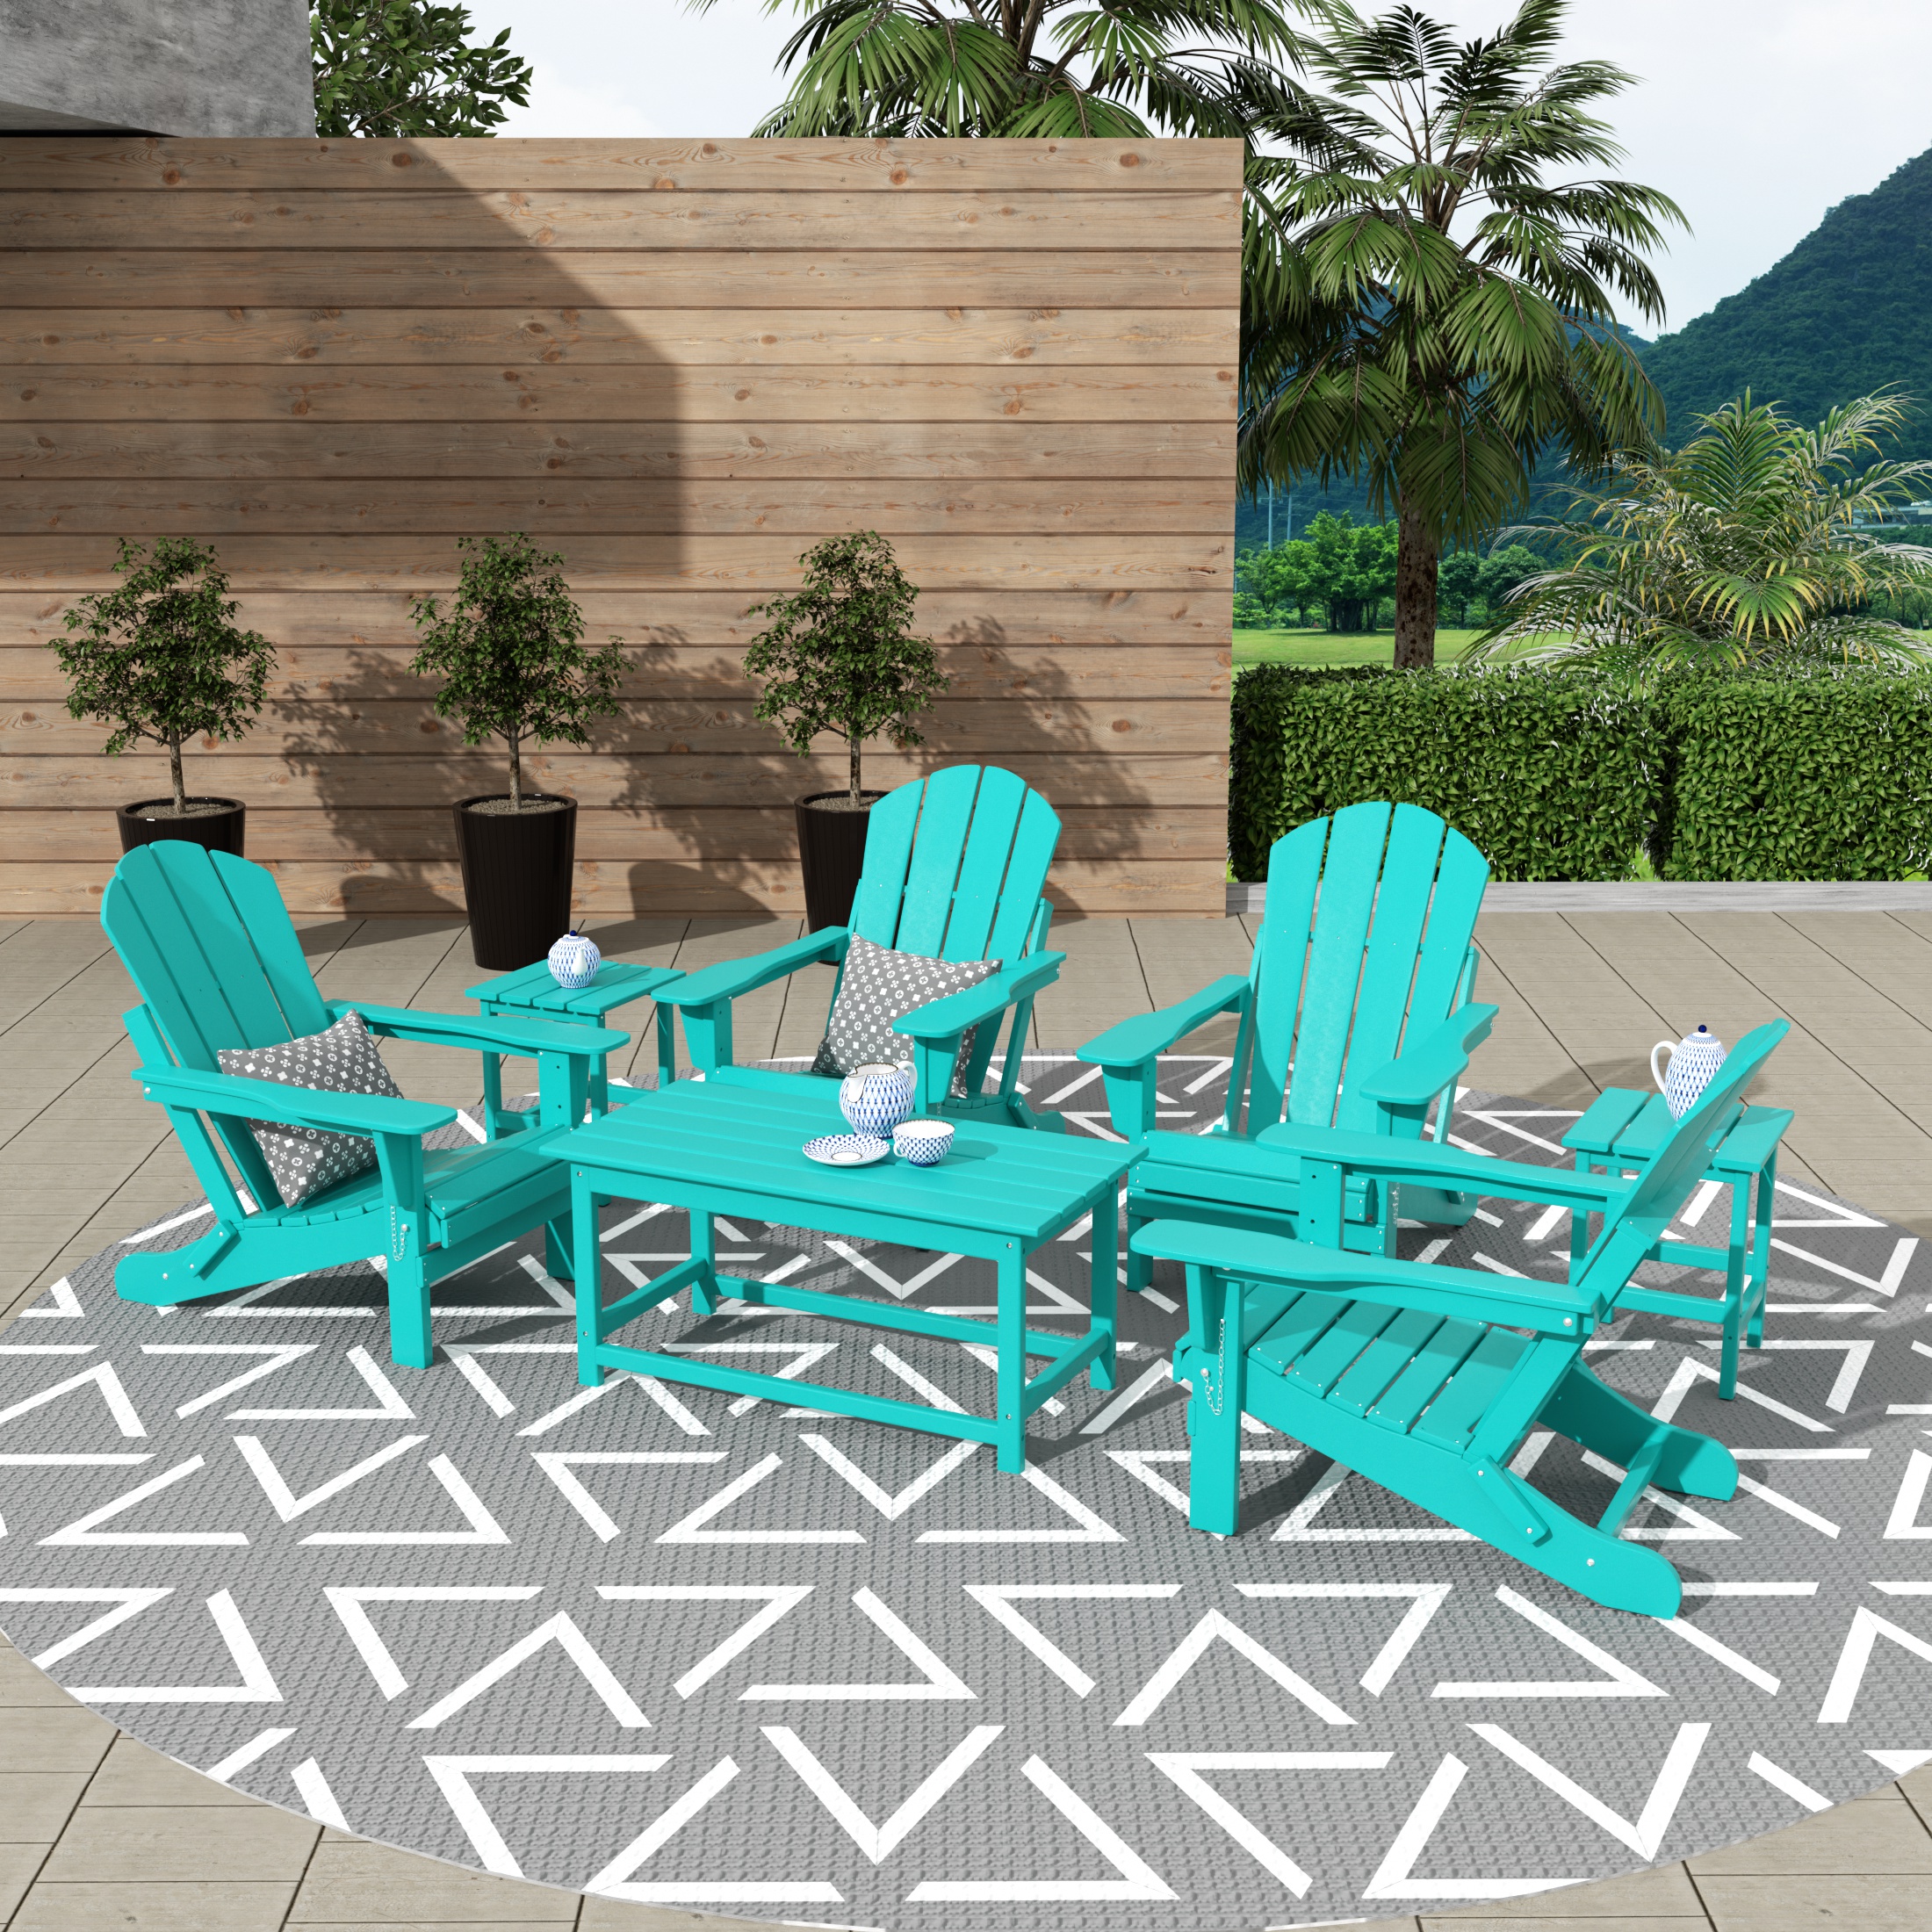 WestinTrends Malibu 7-Pieces Outdoor Patio Furniture Set, All Weather Outdoor Seating Plastic Adirondack Chair Set of 4, Coffee Table and 2 Side Table, Turquoise - image 2 of 7